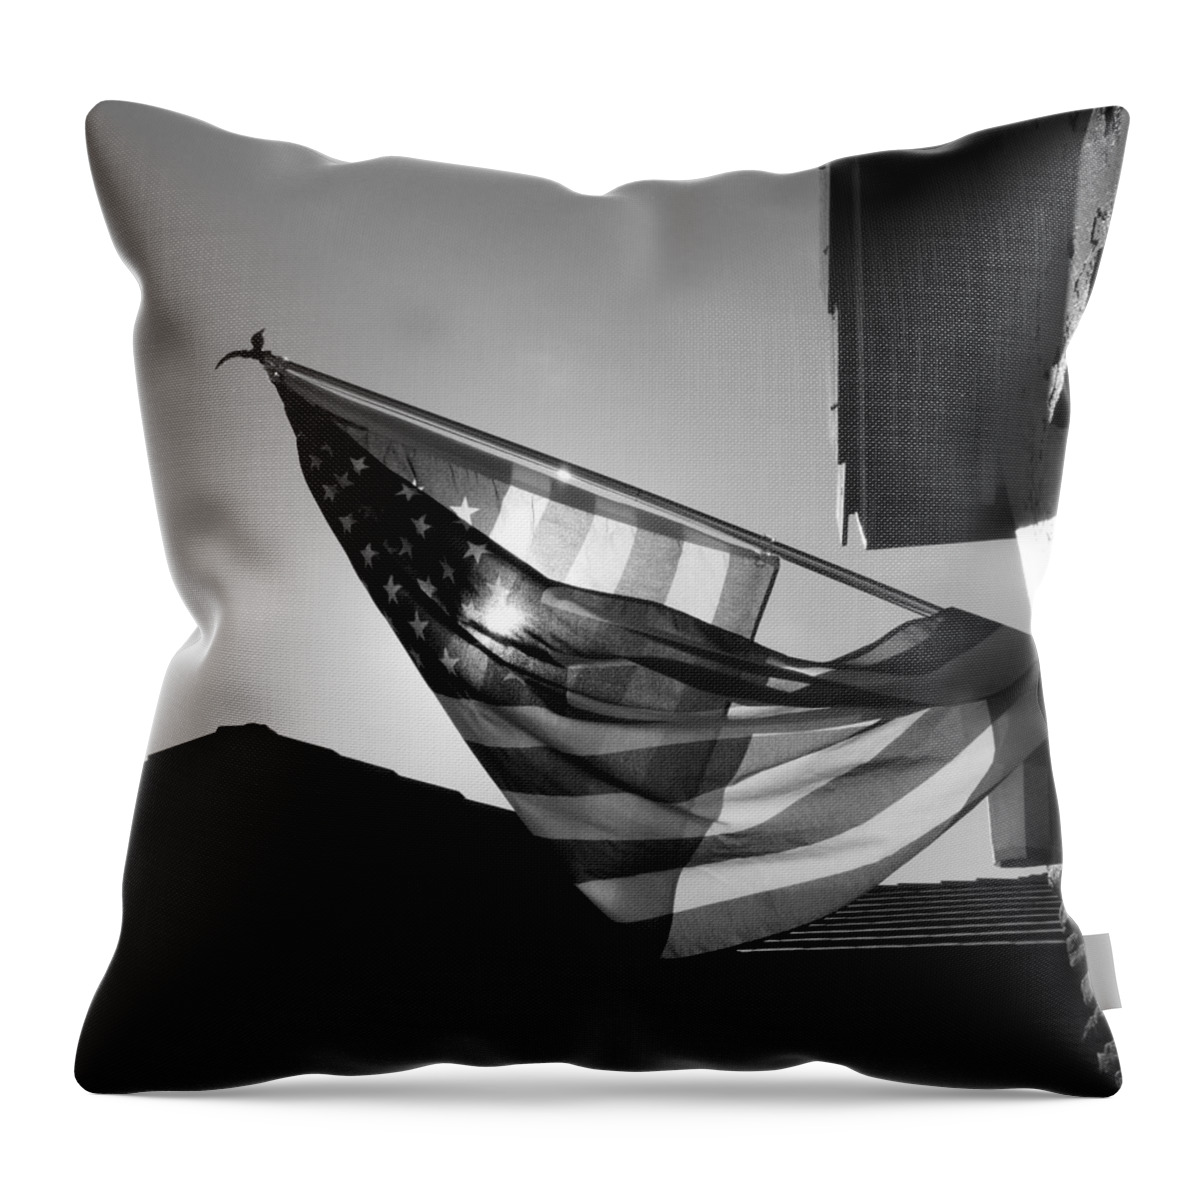 Filtered Sunlight Throw Pillow featuring the photograph Filtered Sunlight by Bill Tomsa